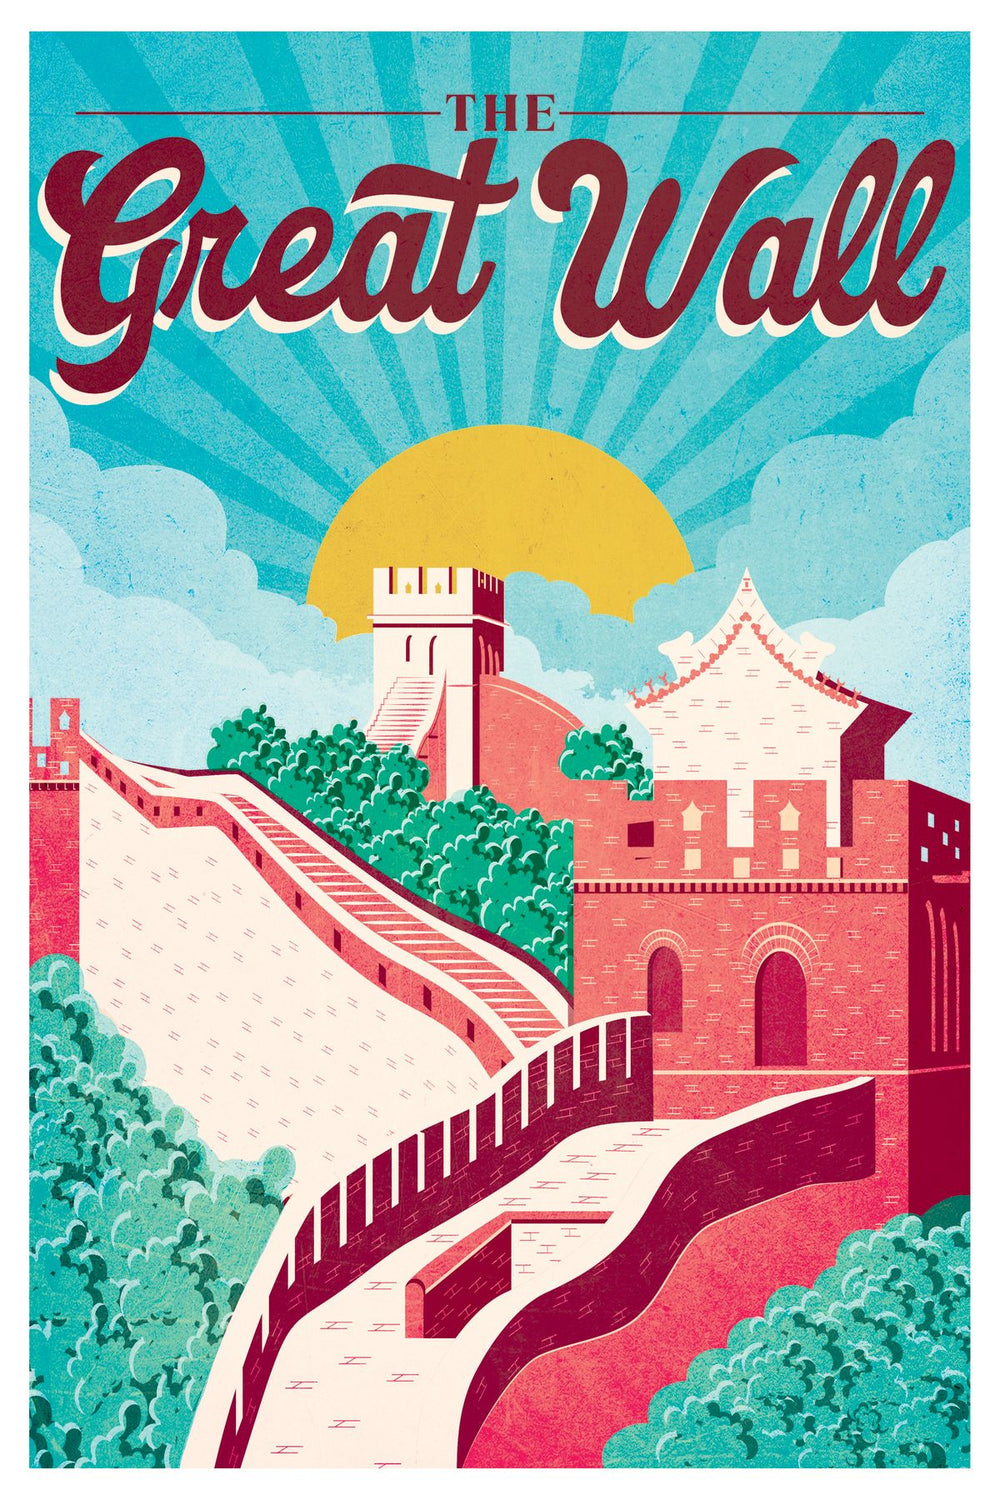 The Great Wall Tourism Vintage Poster